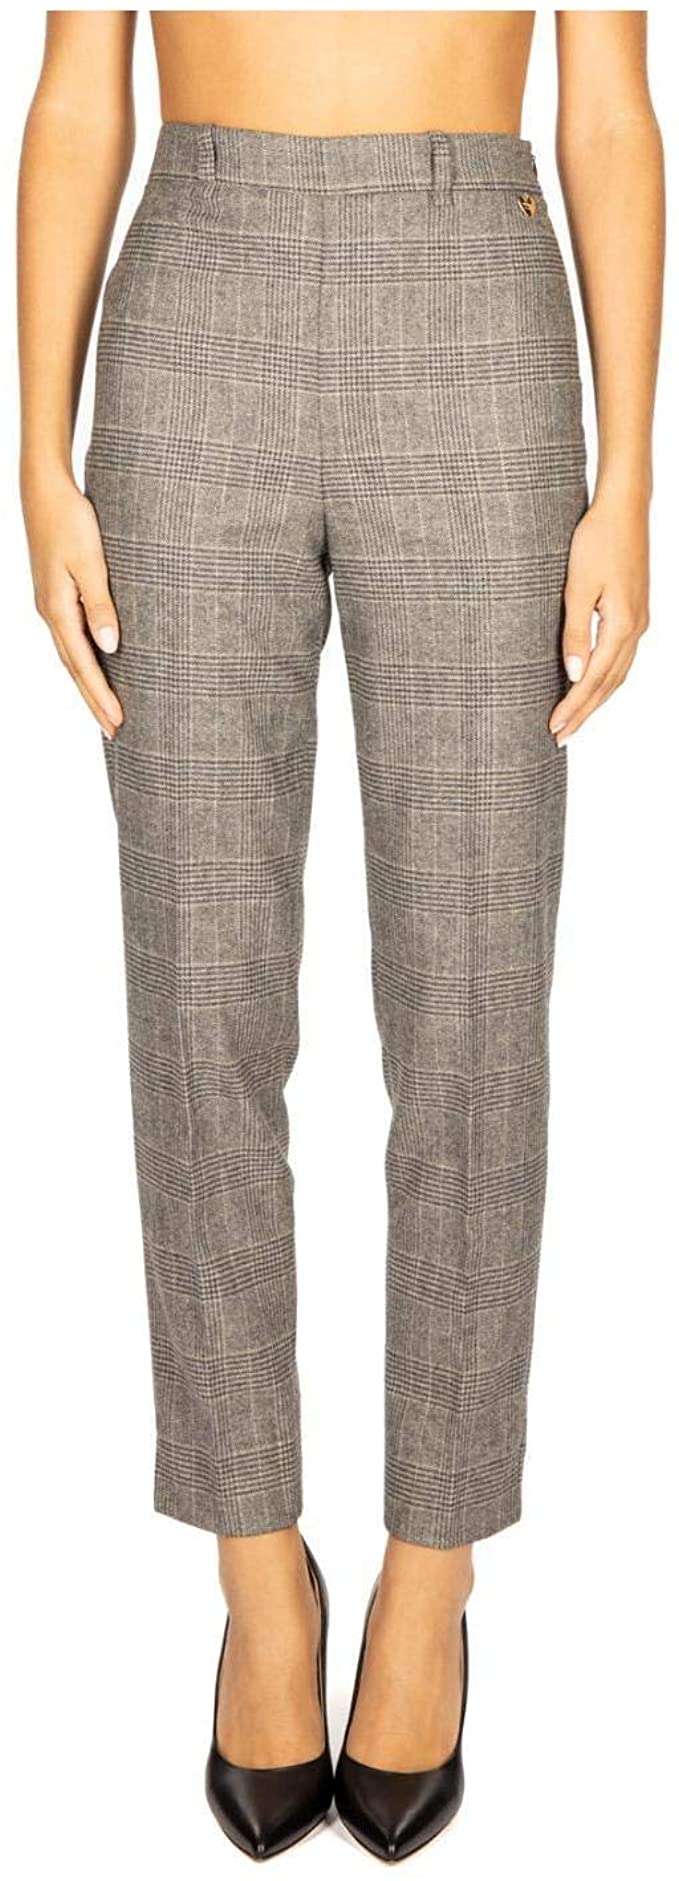 Prince of Wales women's trousers